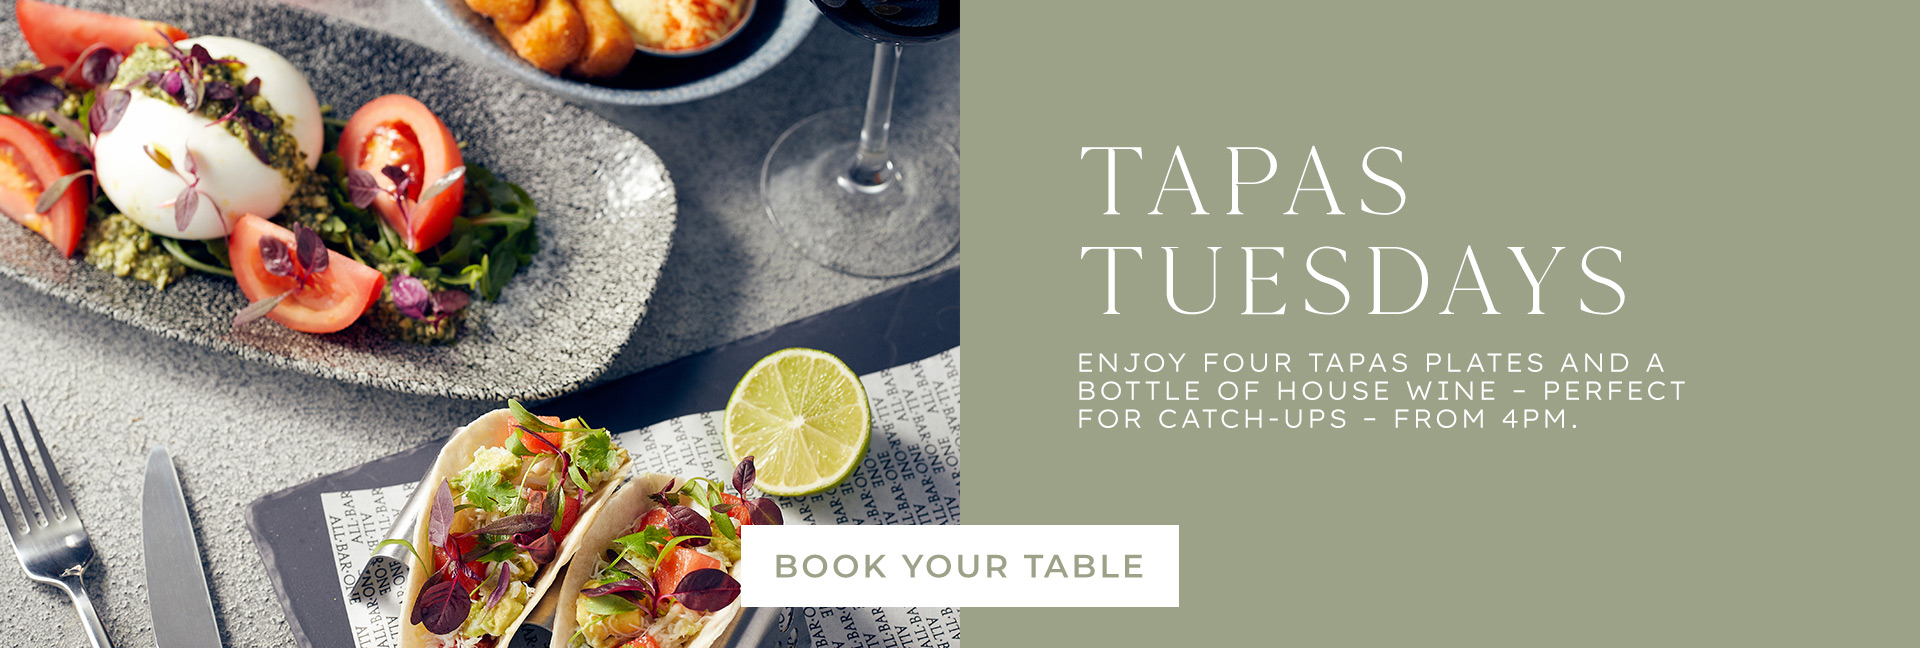 Tapas Tuesday at All Bar One Bham T1 Landside - Book now